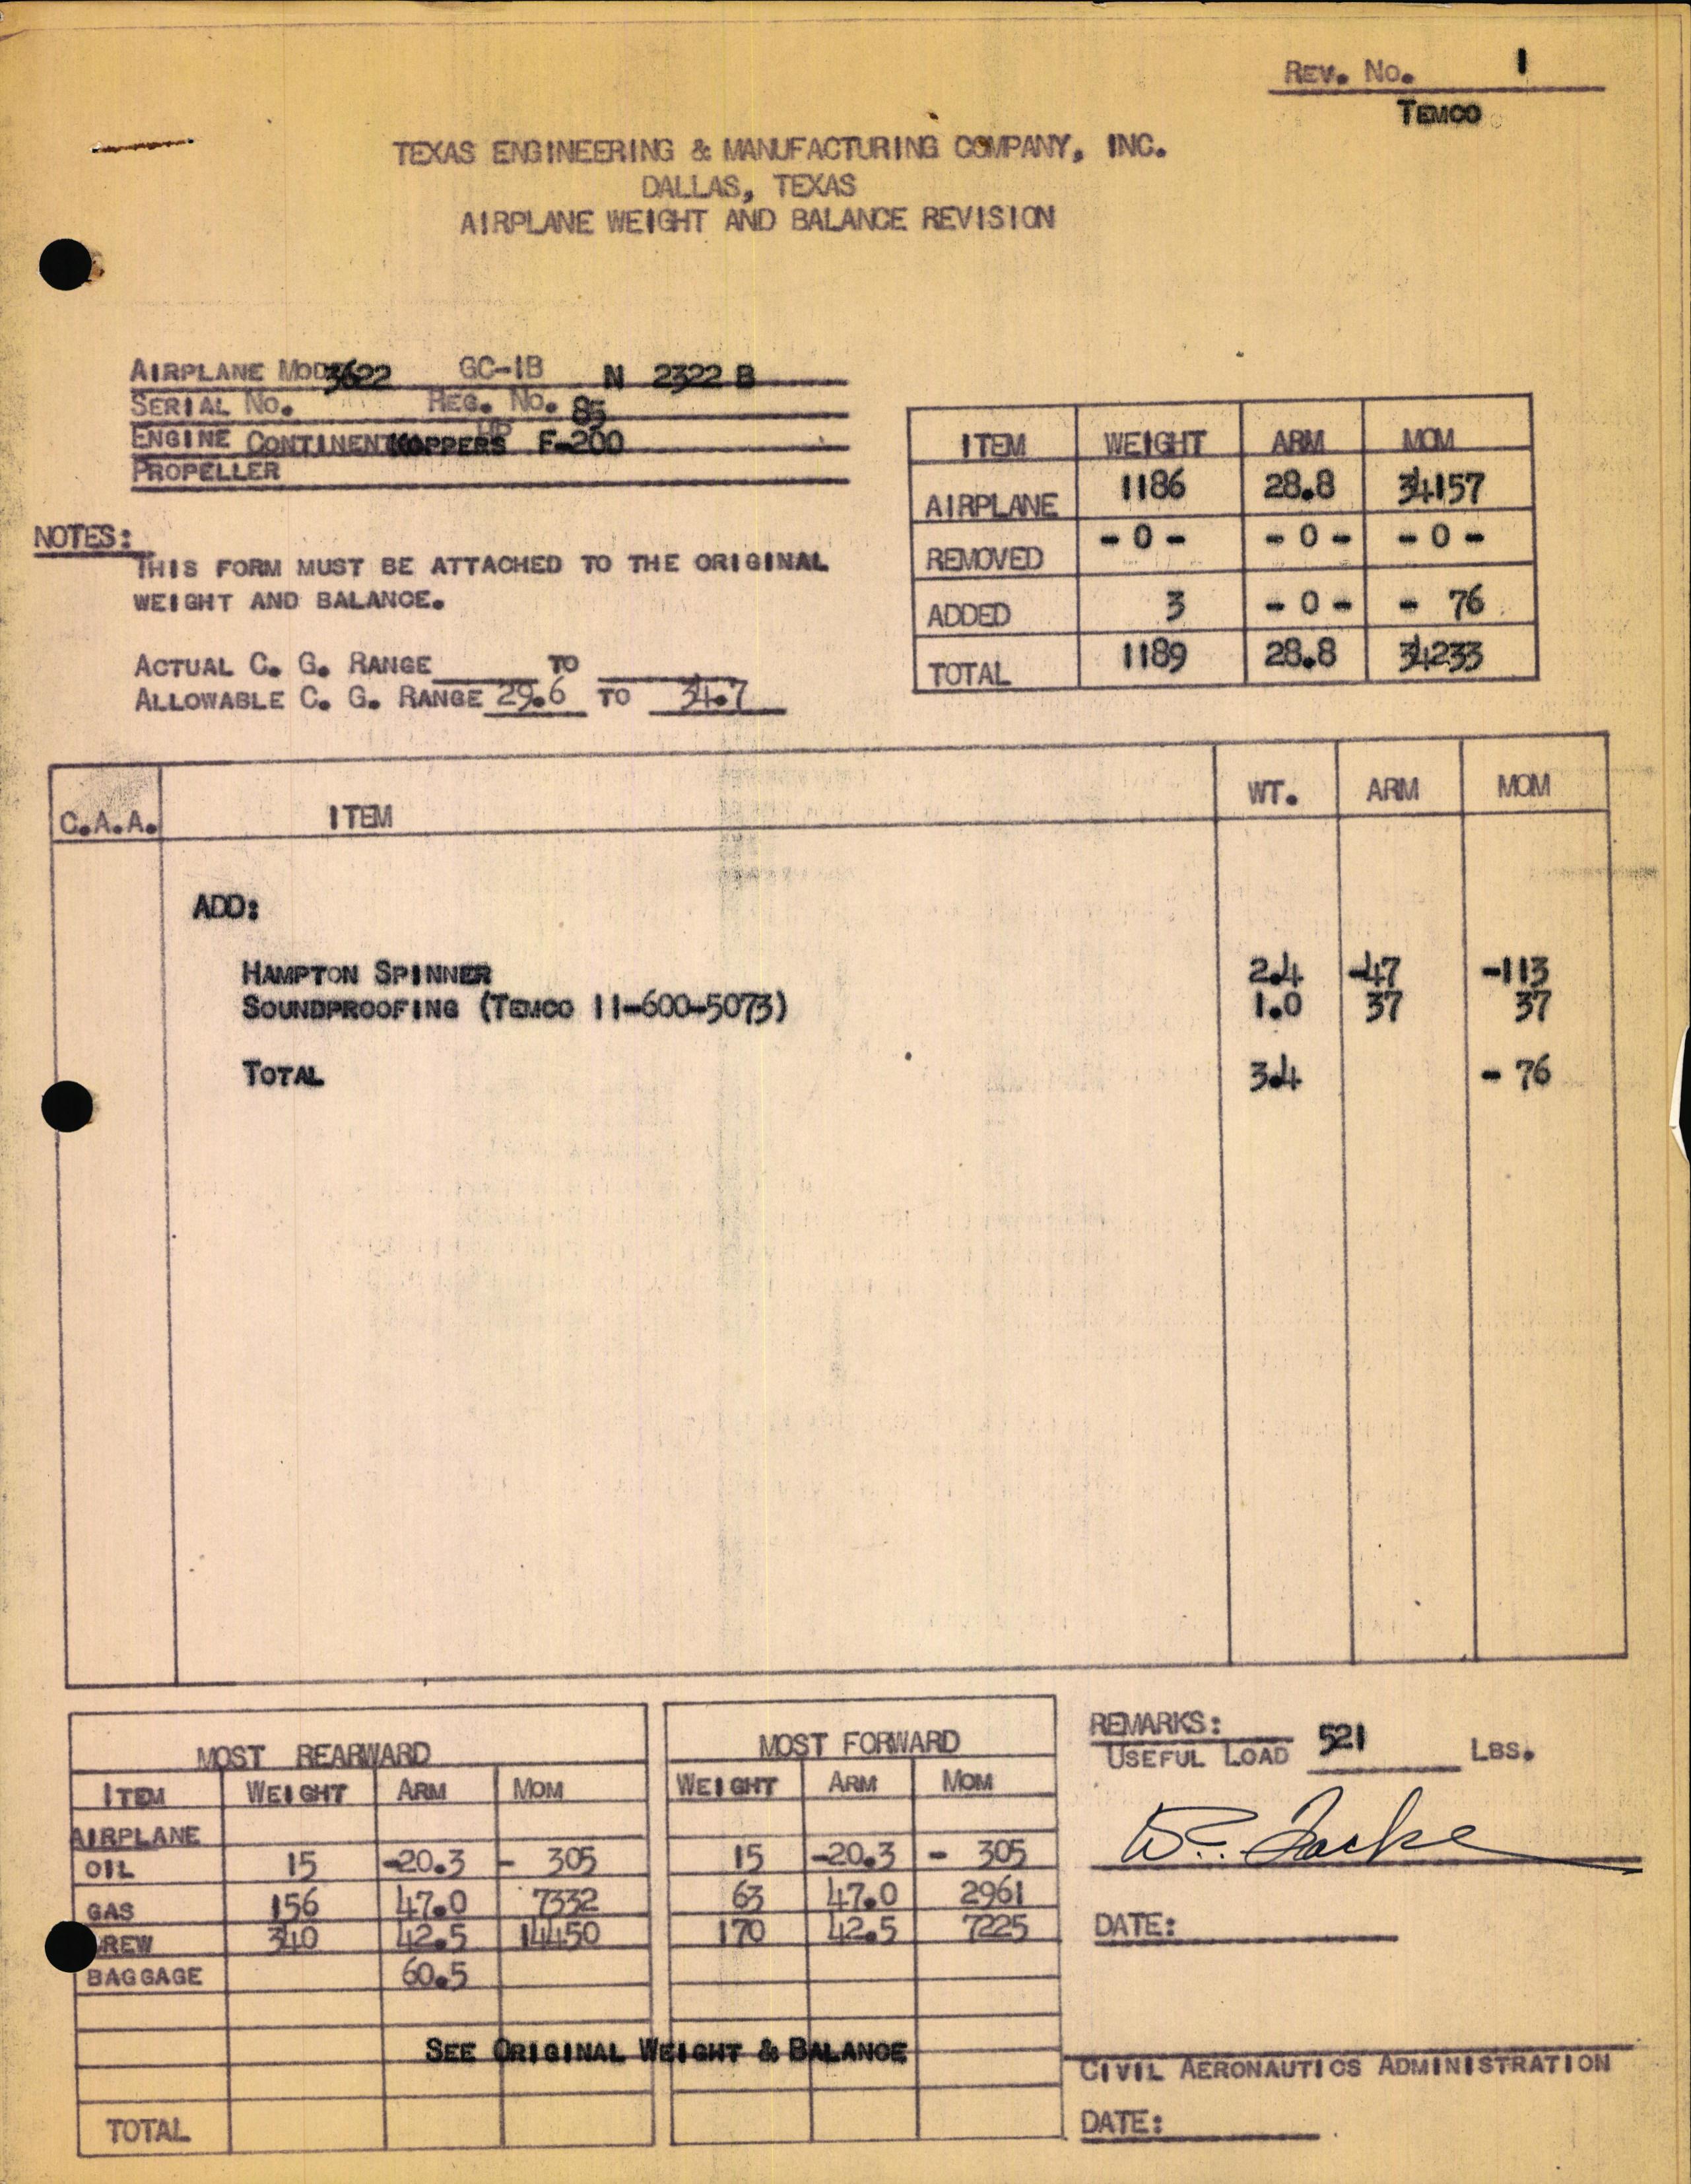 Sample page 1 from AirCorps Library document: Technical Information for Serial Number 3622